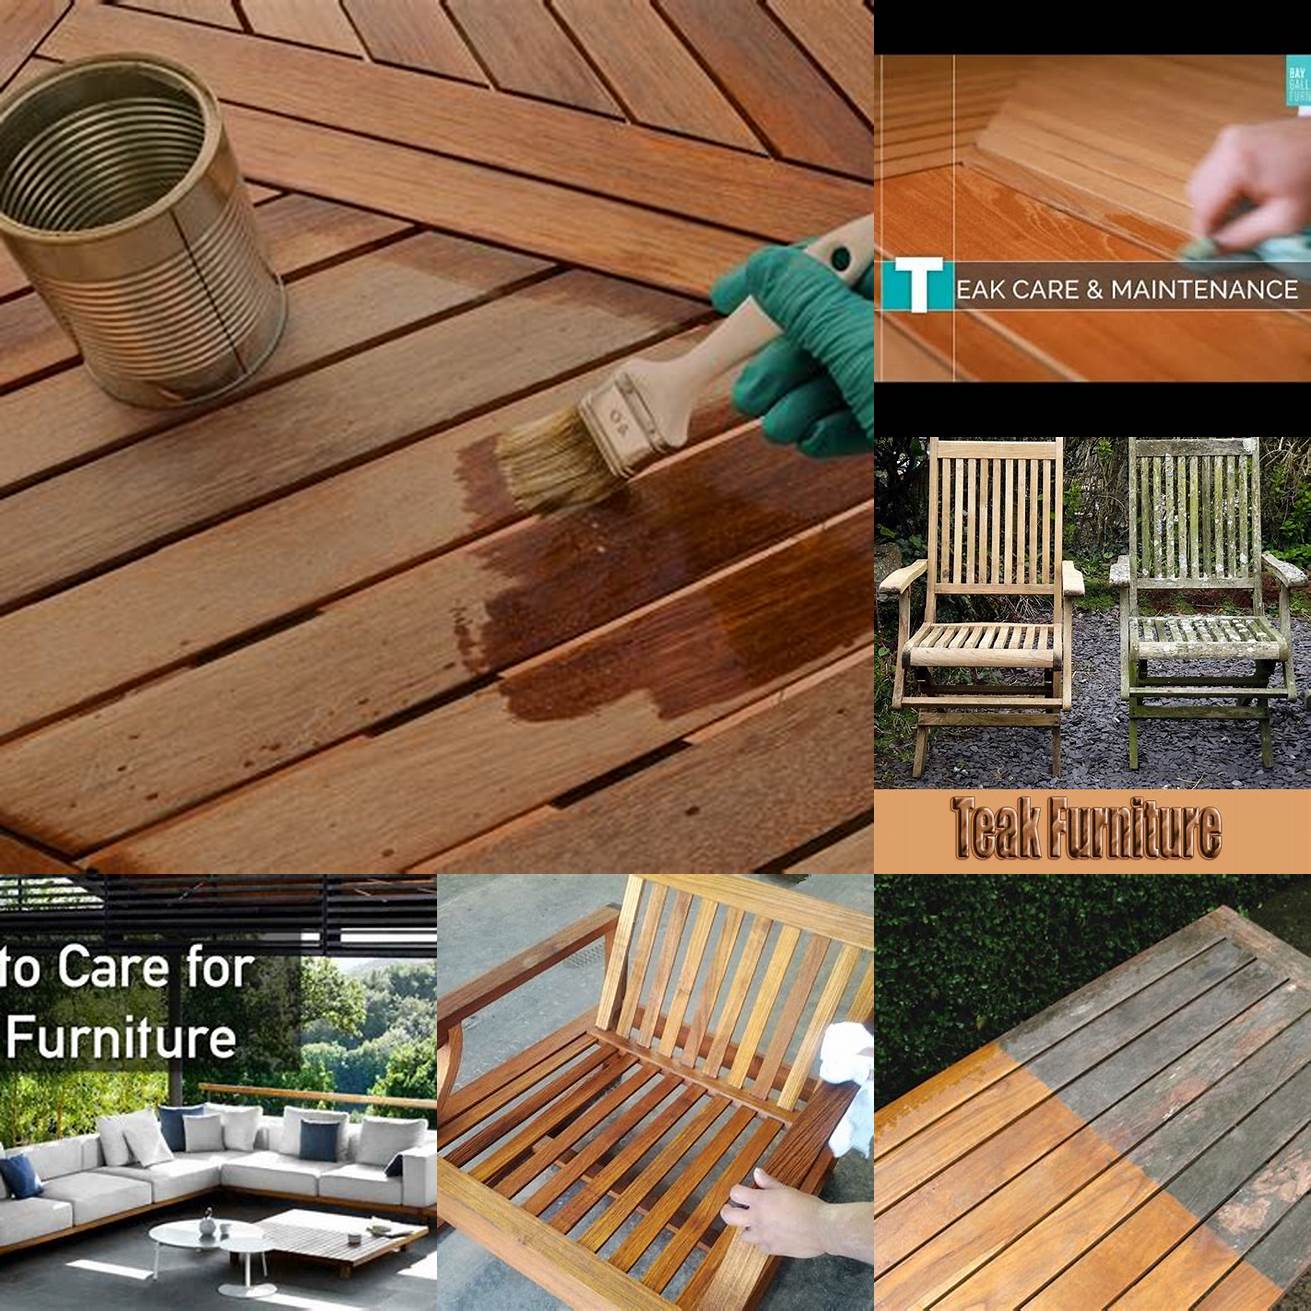 Staying Ahead of the Curve with Teak Furniture Care